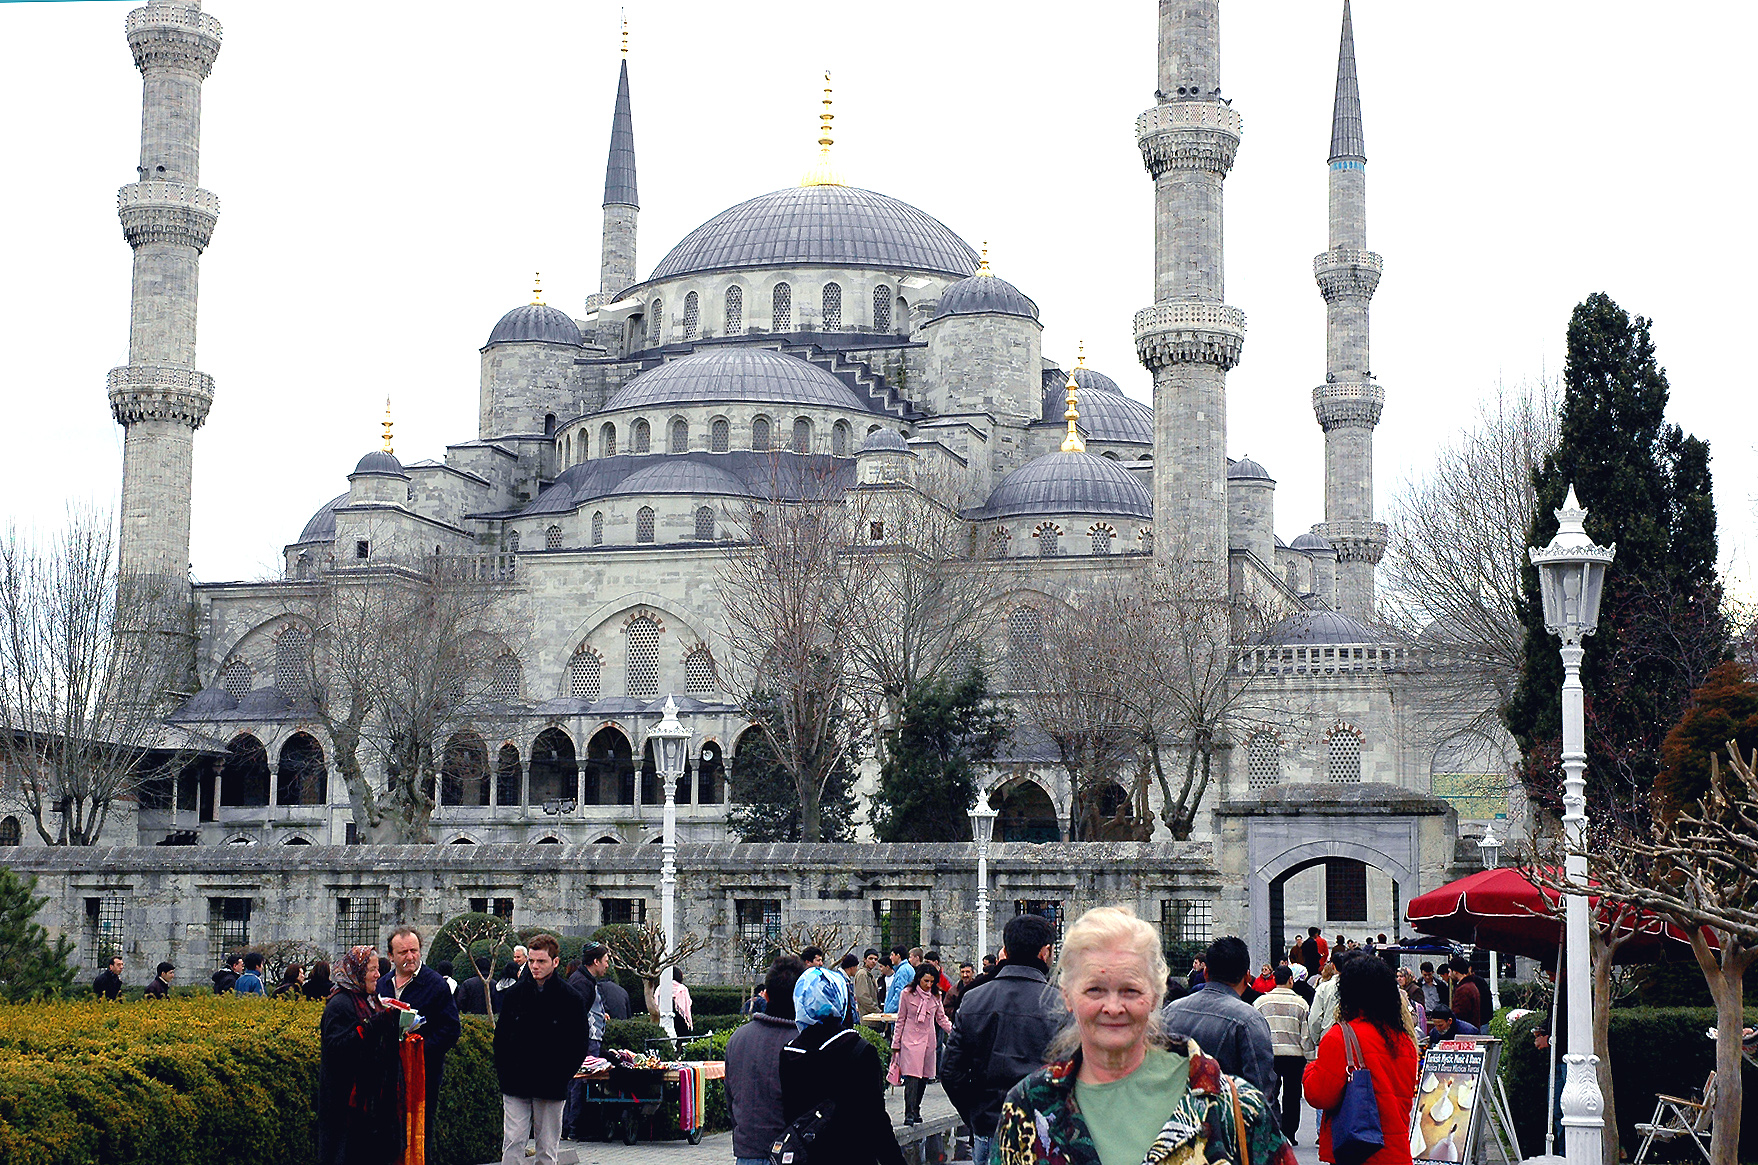 Eclipse 1999 - a-Istanbul - A51 - Blue Mosque